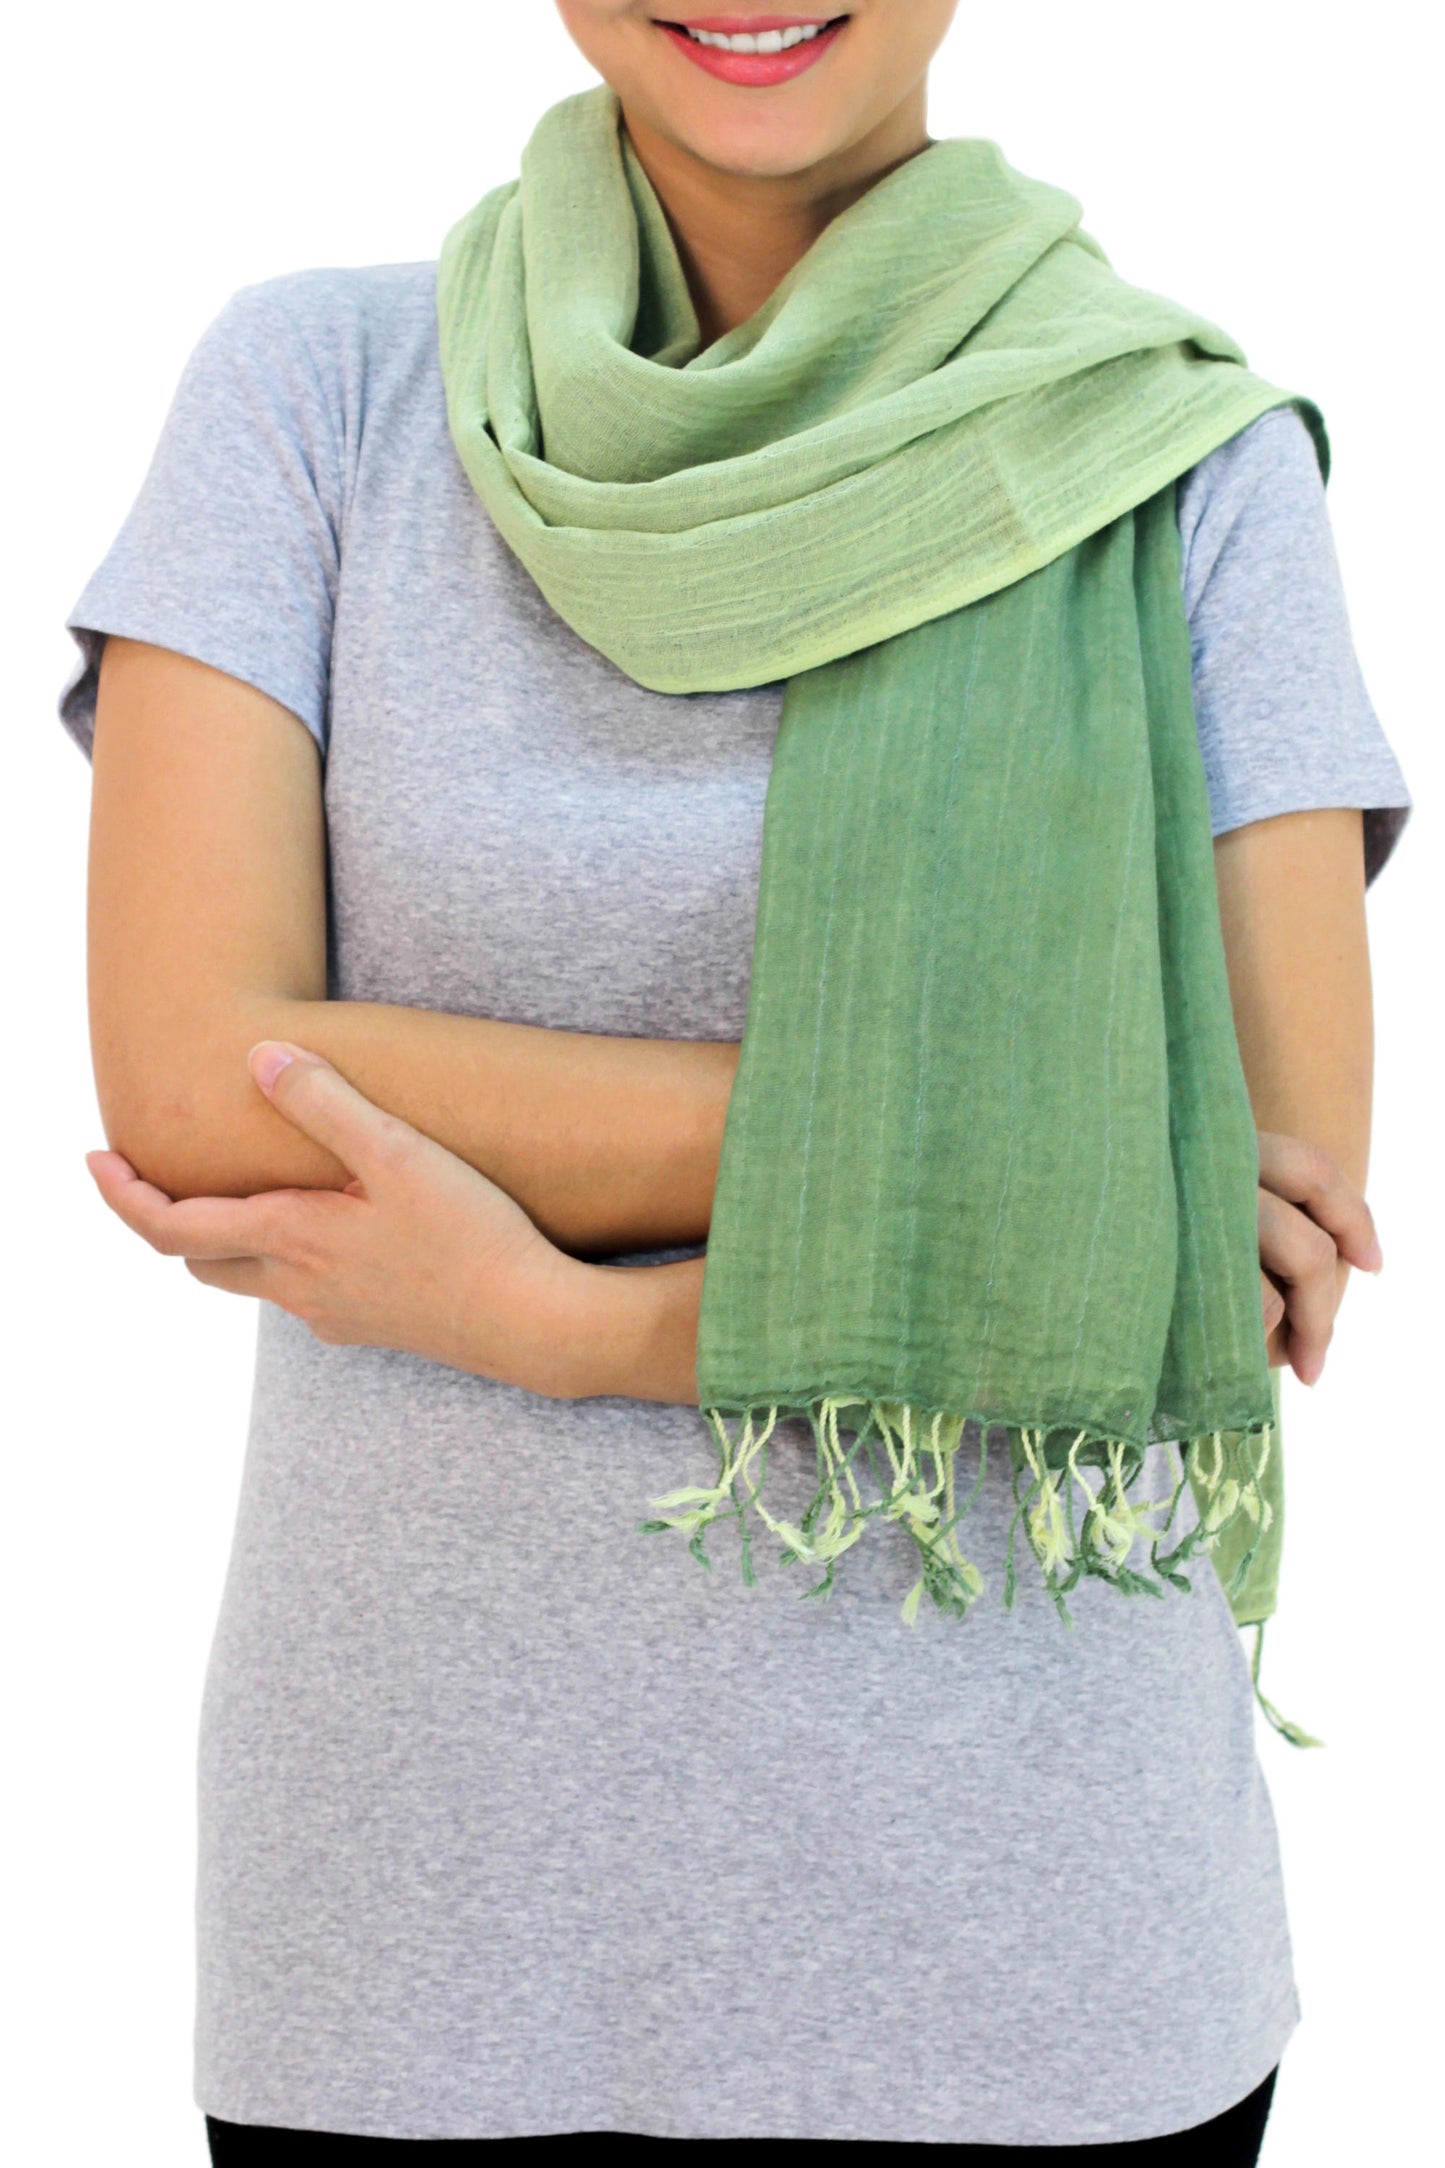 Jade Green Duet 2-in-1 Hand-woven Cotton Reversible Scarf